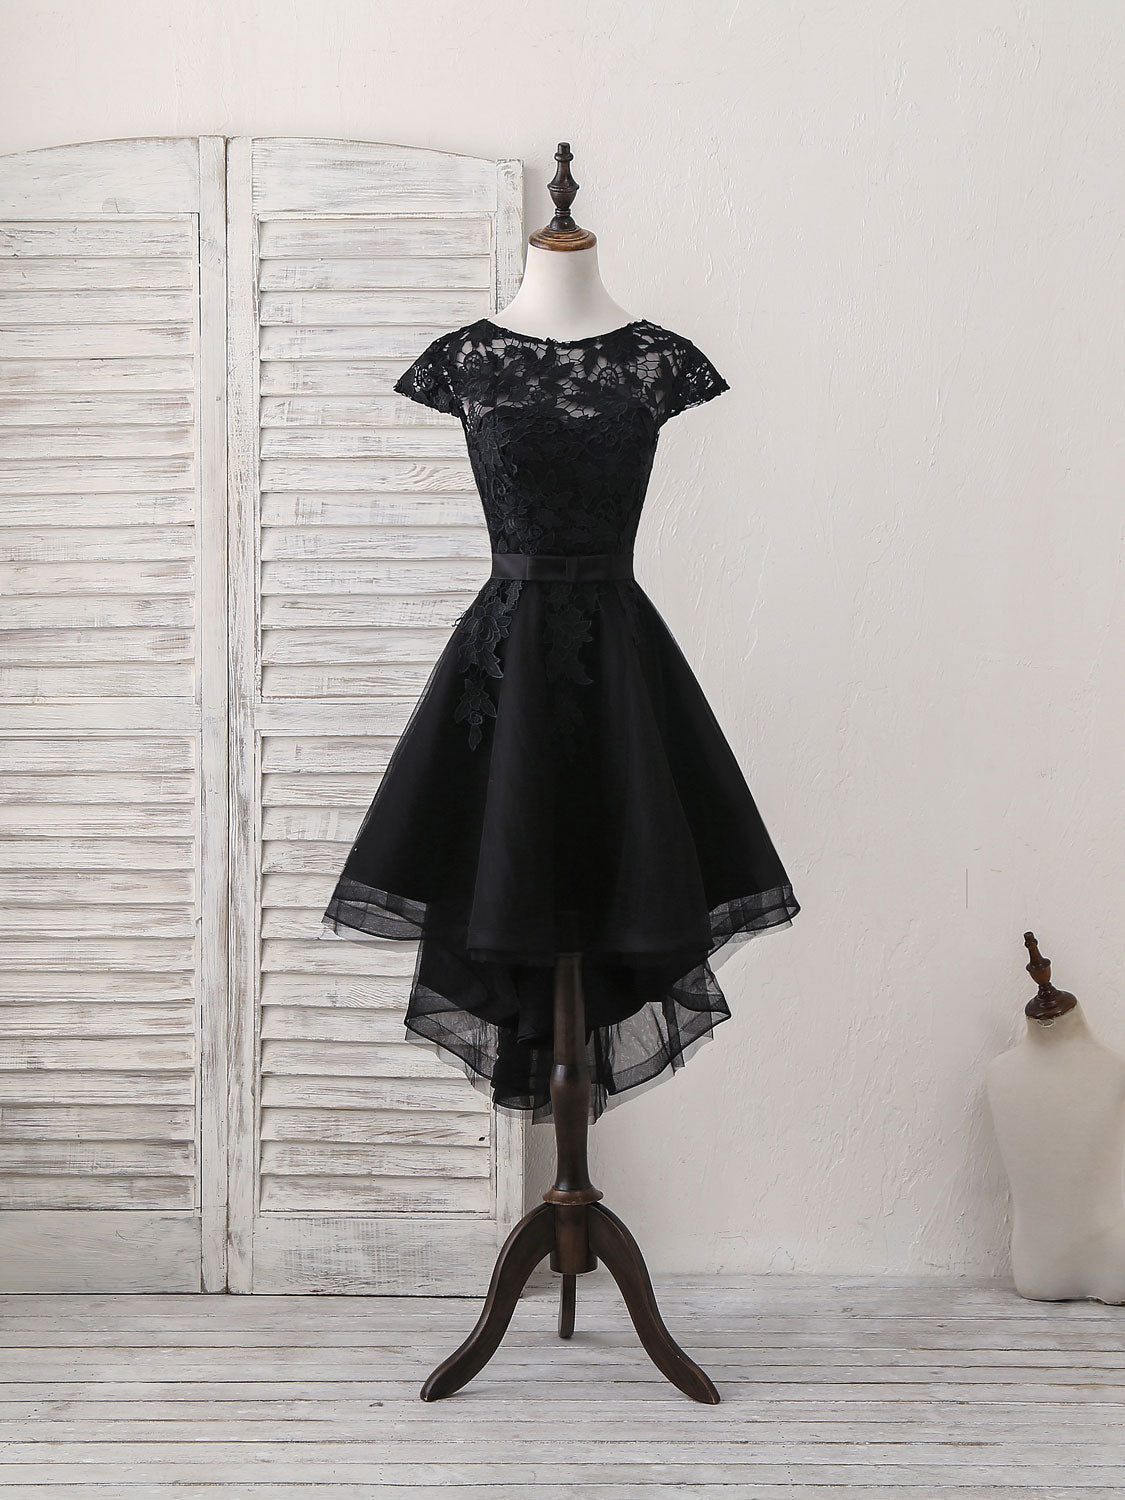 Black Round Neck Tulle Lace Applique Short Prom Dress Outfits For Girls, Black Homecoming Dress